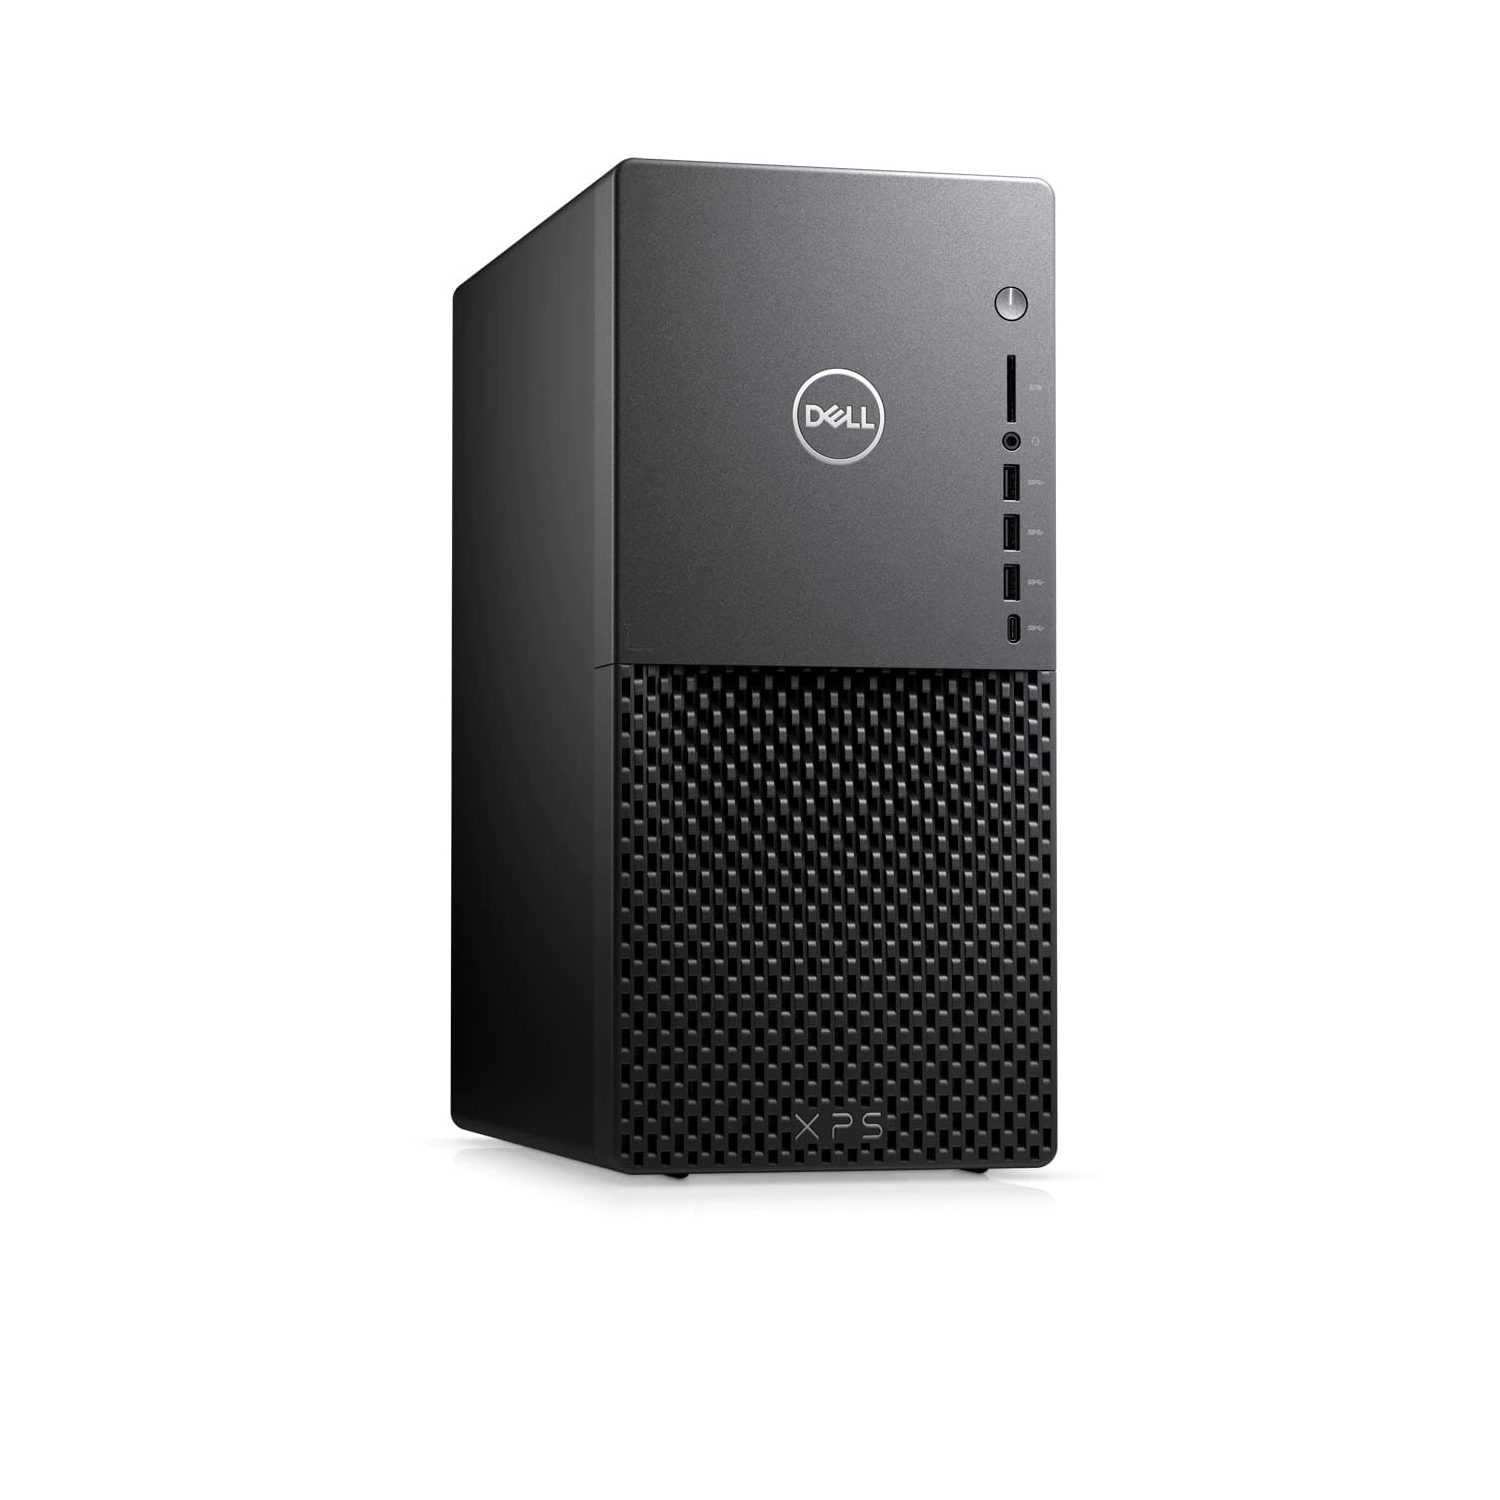 Refurbished (Excellent) - Dell XPS 8940 Desktop (2020) | Core i9 - 2TB HDD + 1TB SSD - 64GB RAM - RTX 3060 | 8 Cores @ 4.9 GHz - 11th Gen CPU Certified Refurbished